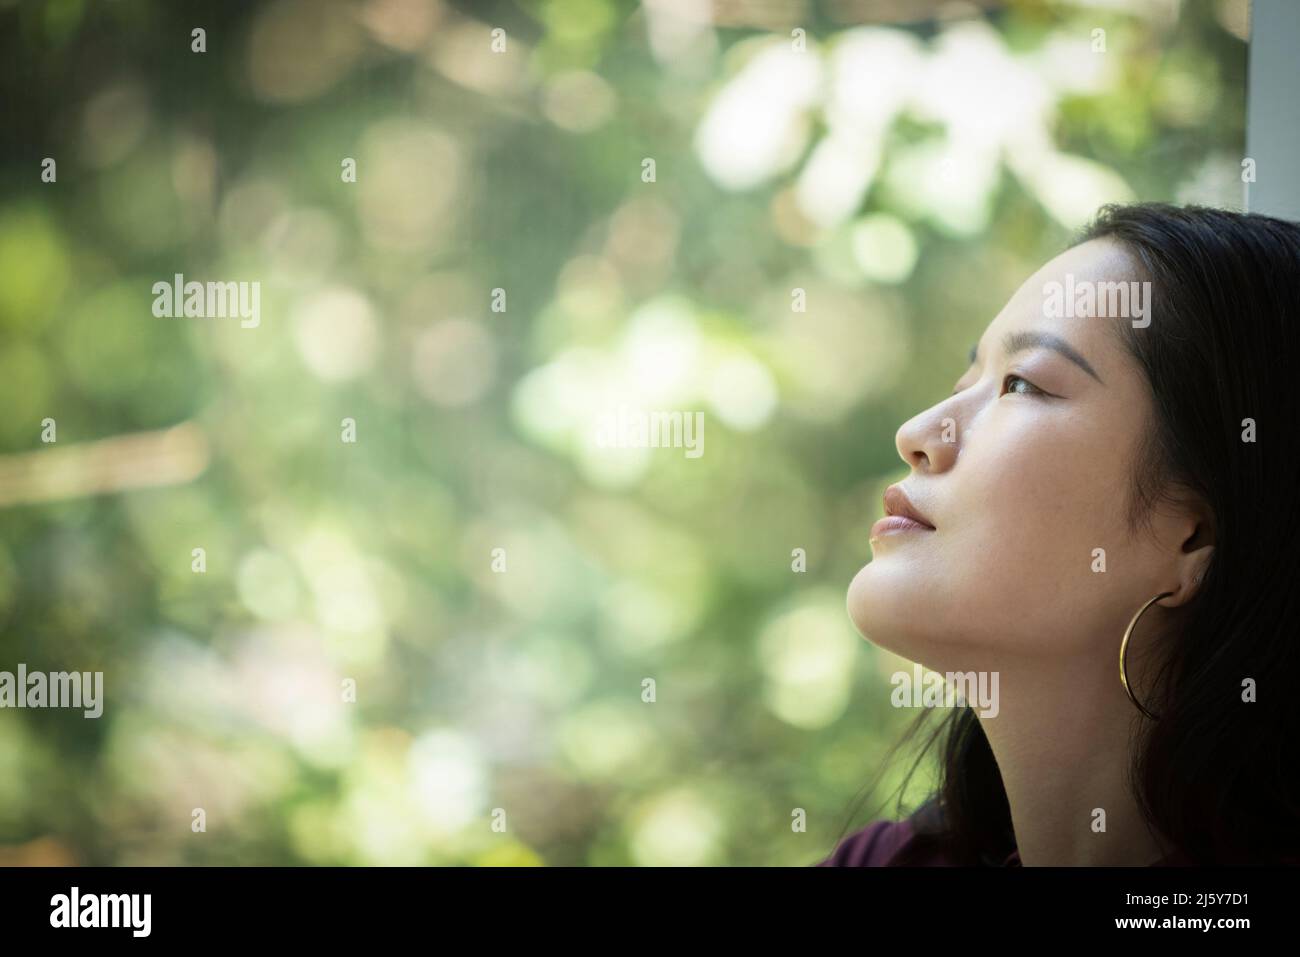 Profile serene young woman looking out window Stock Photo